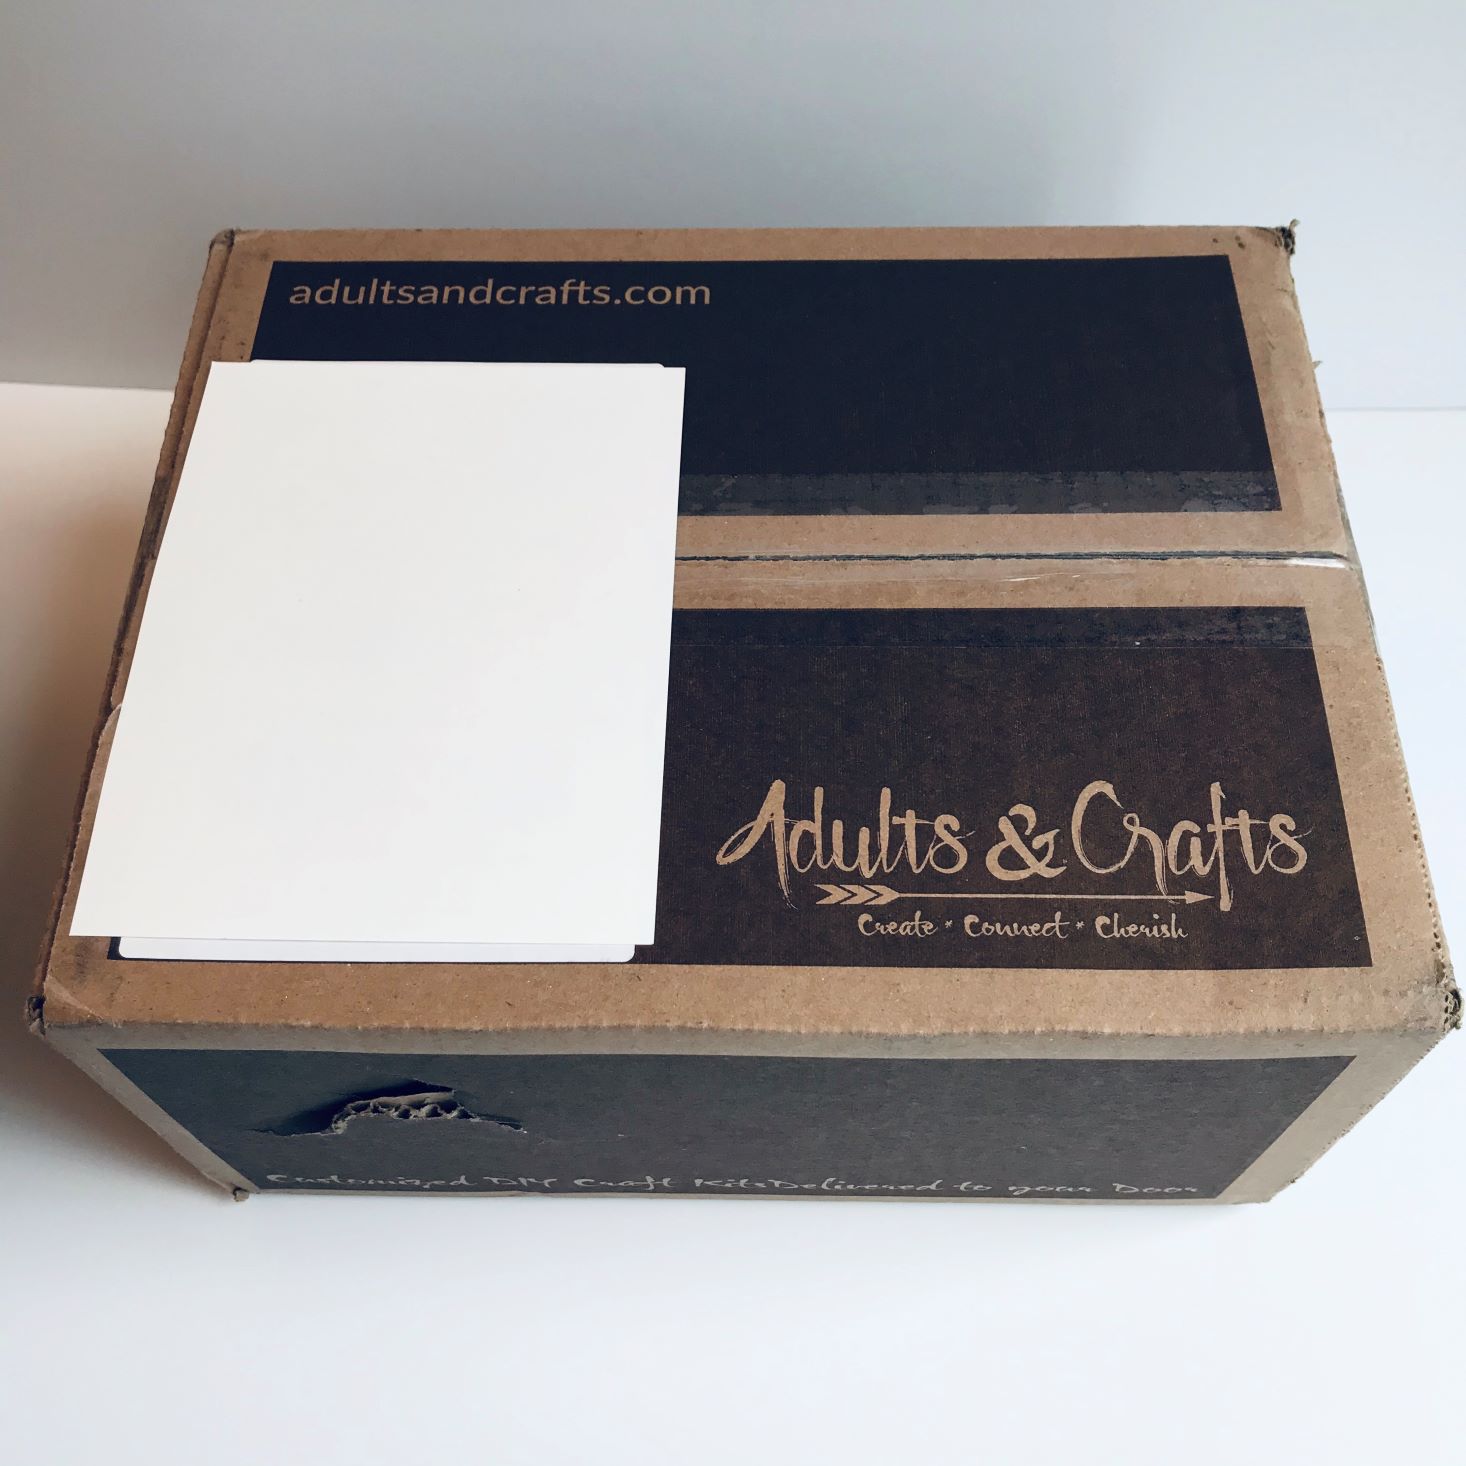 Adults & Crafts Subscription Review + Coupon – November 2019